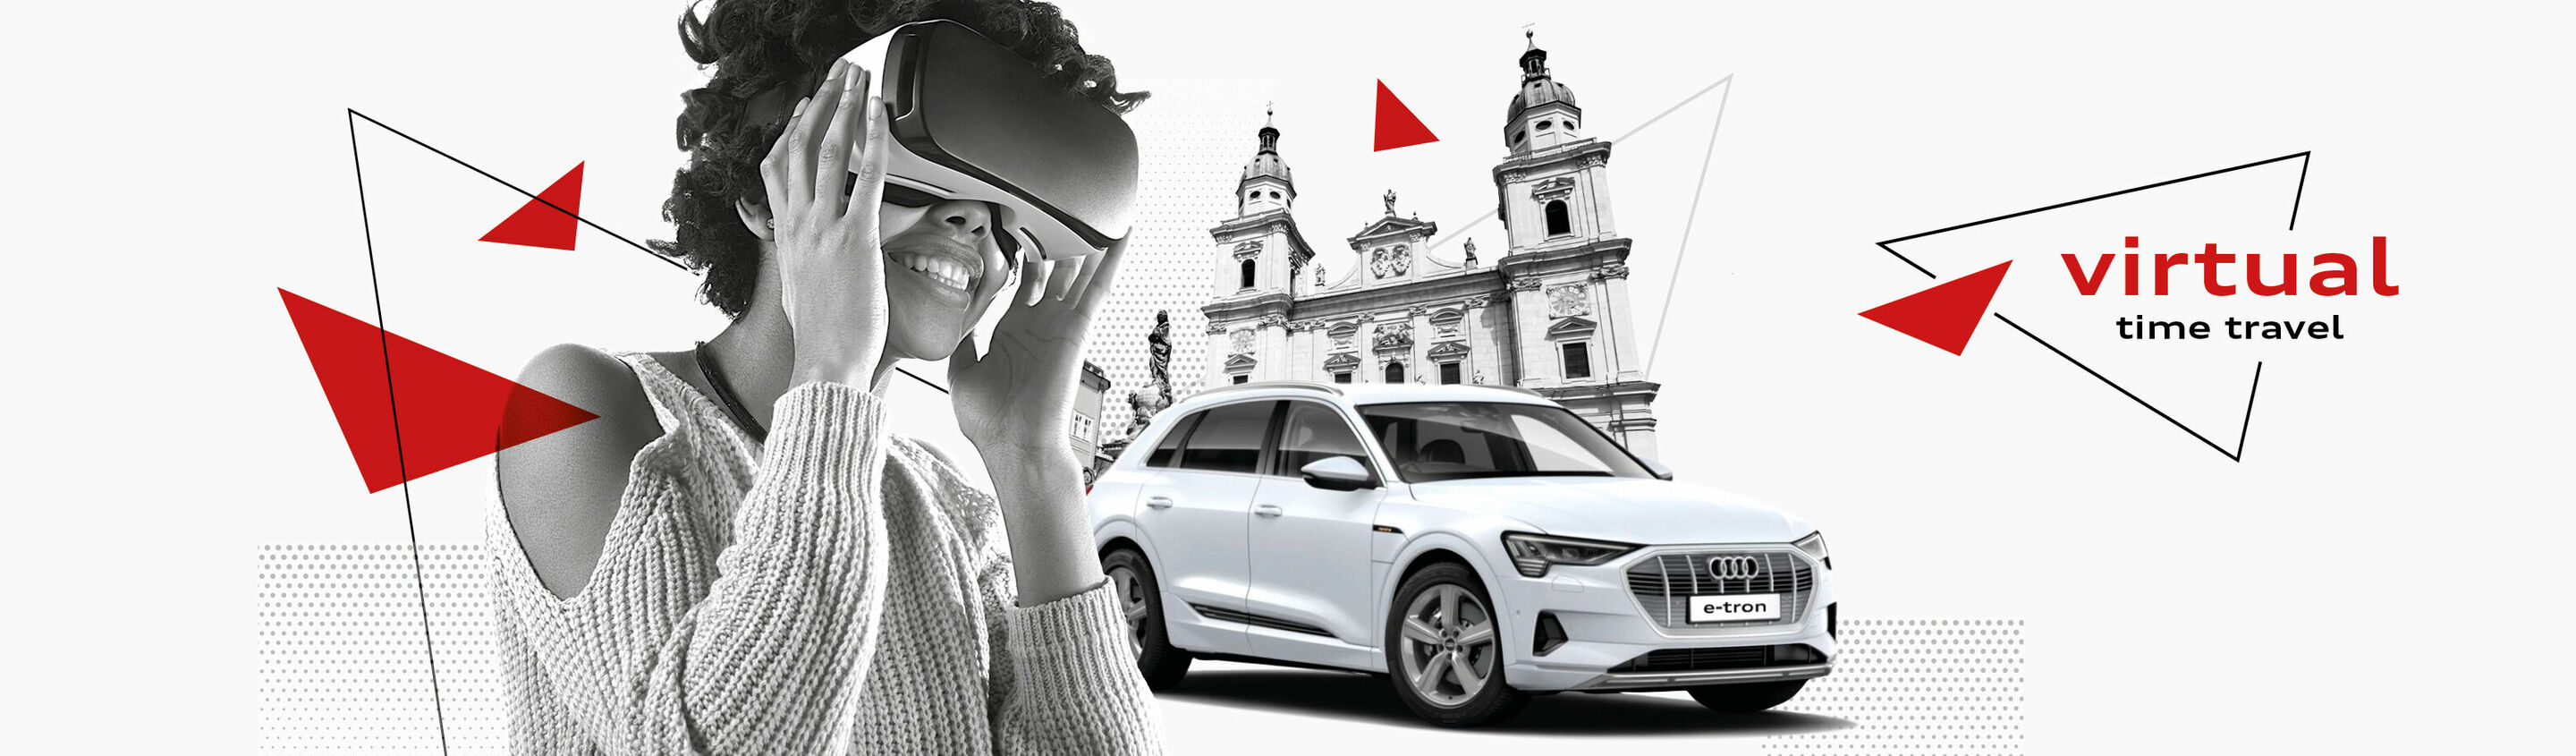 Audi is making the history of the Salzburg Festival “experienceable”